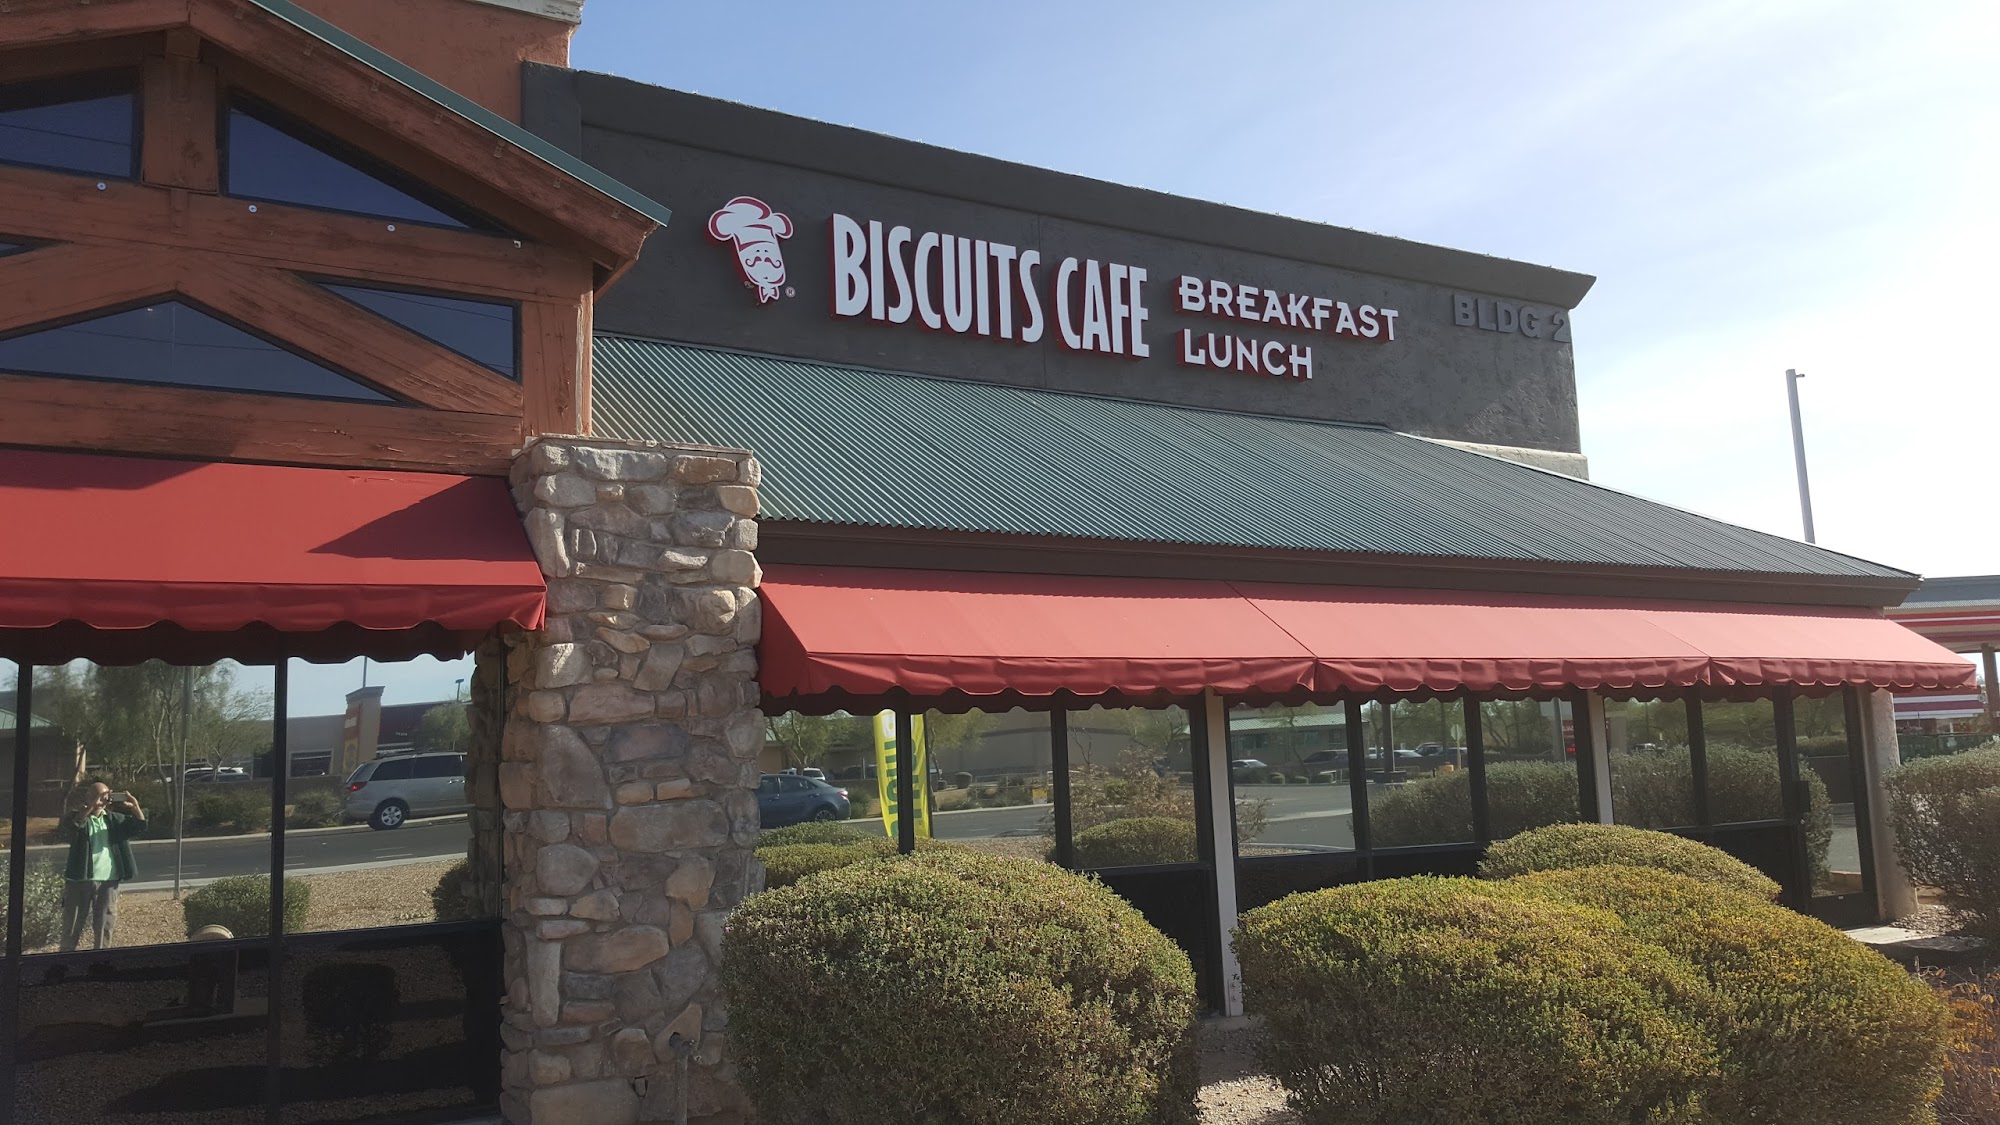 Biscuits Cafe